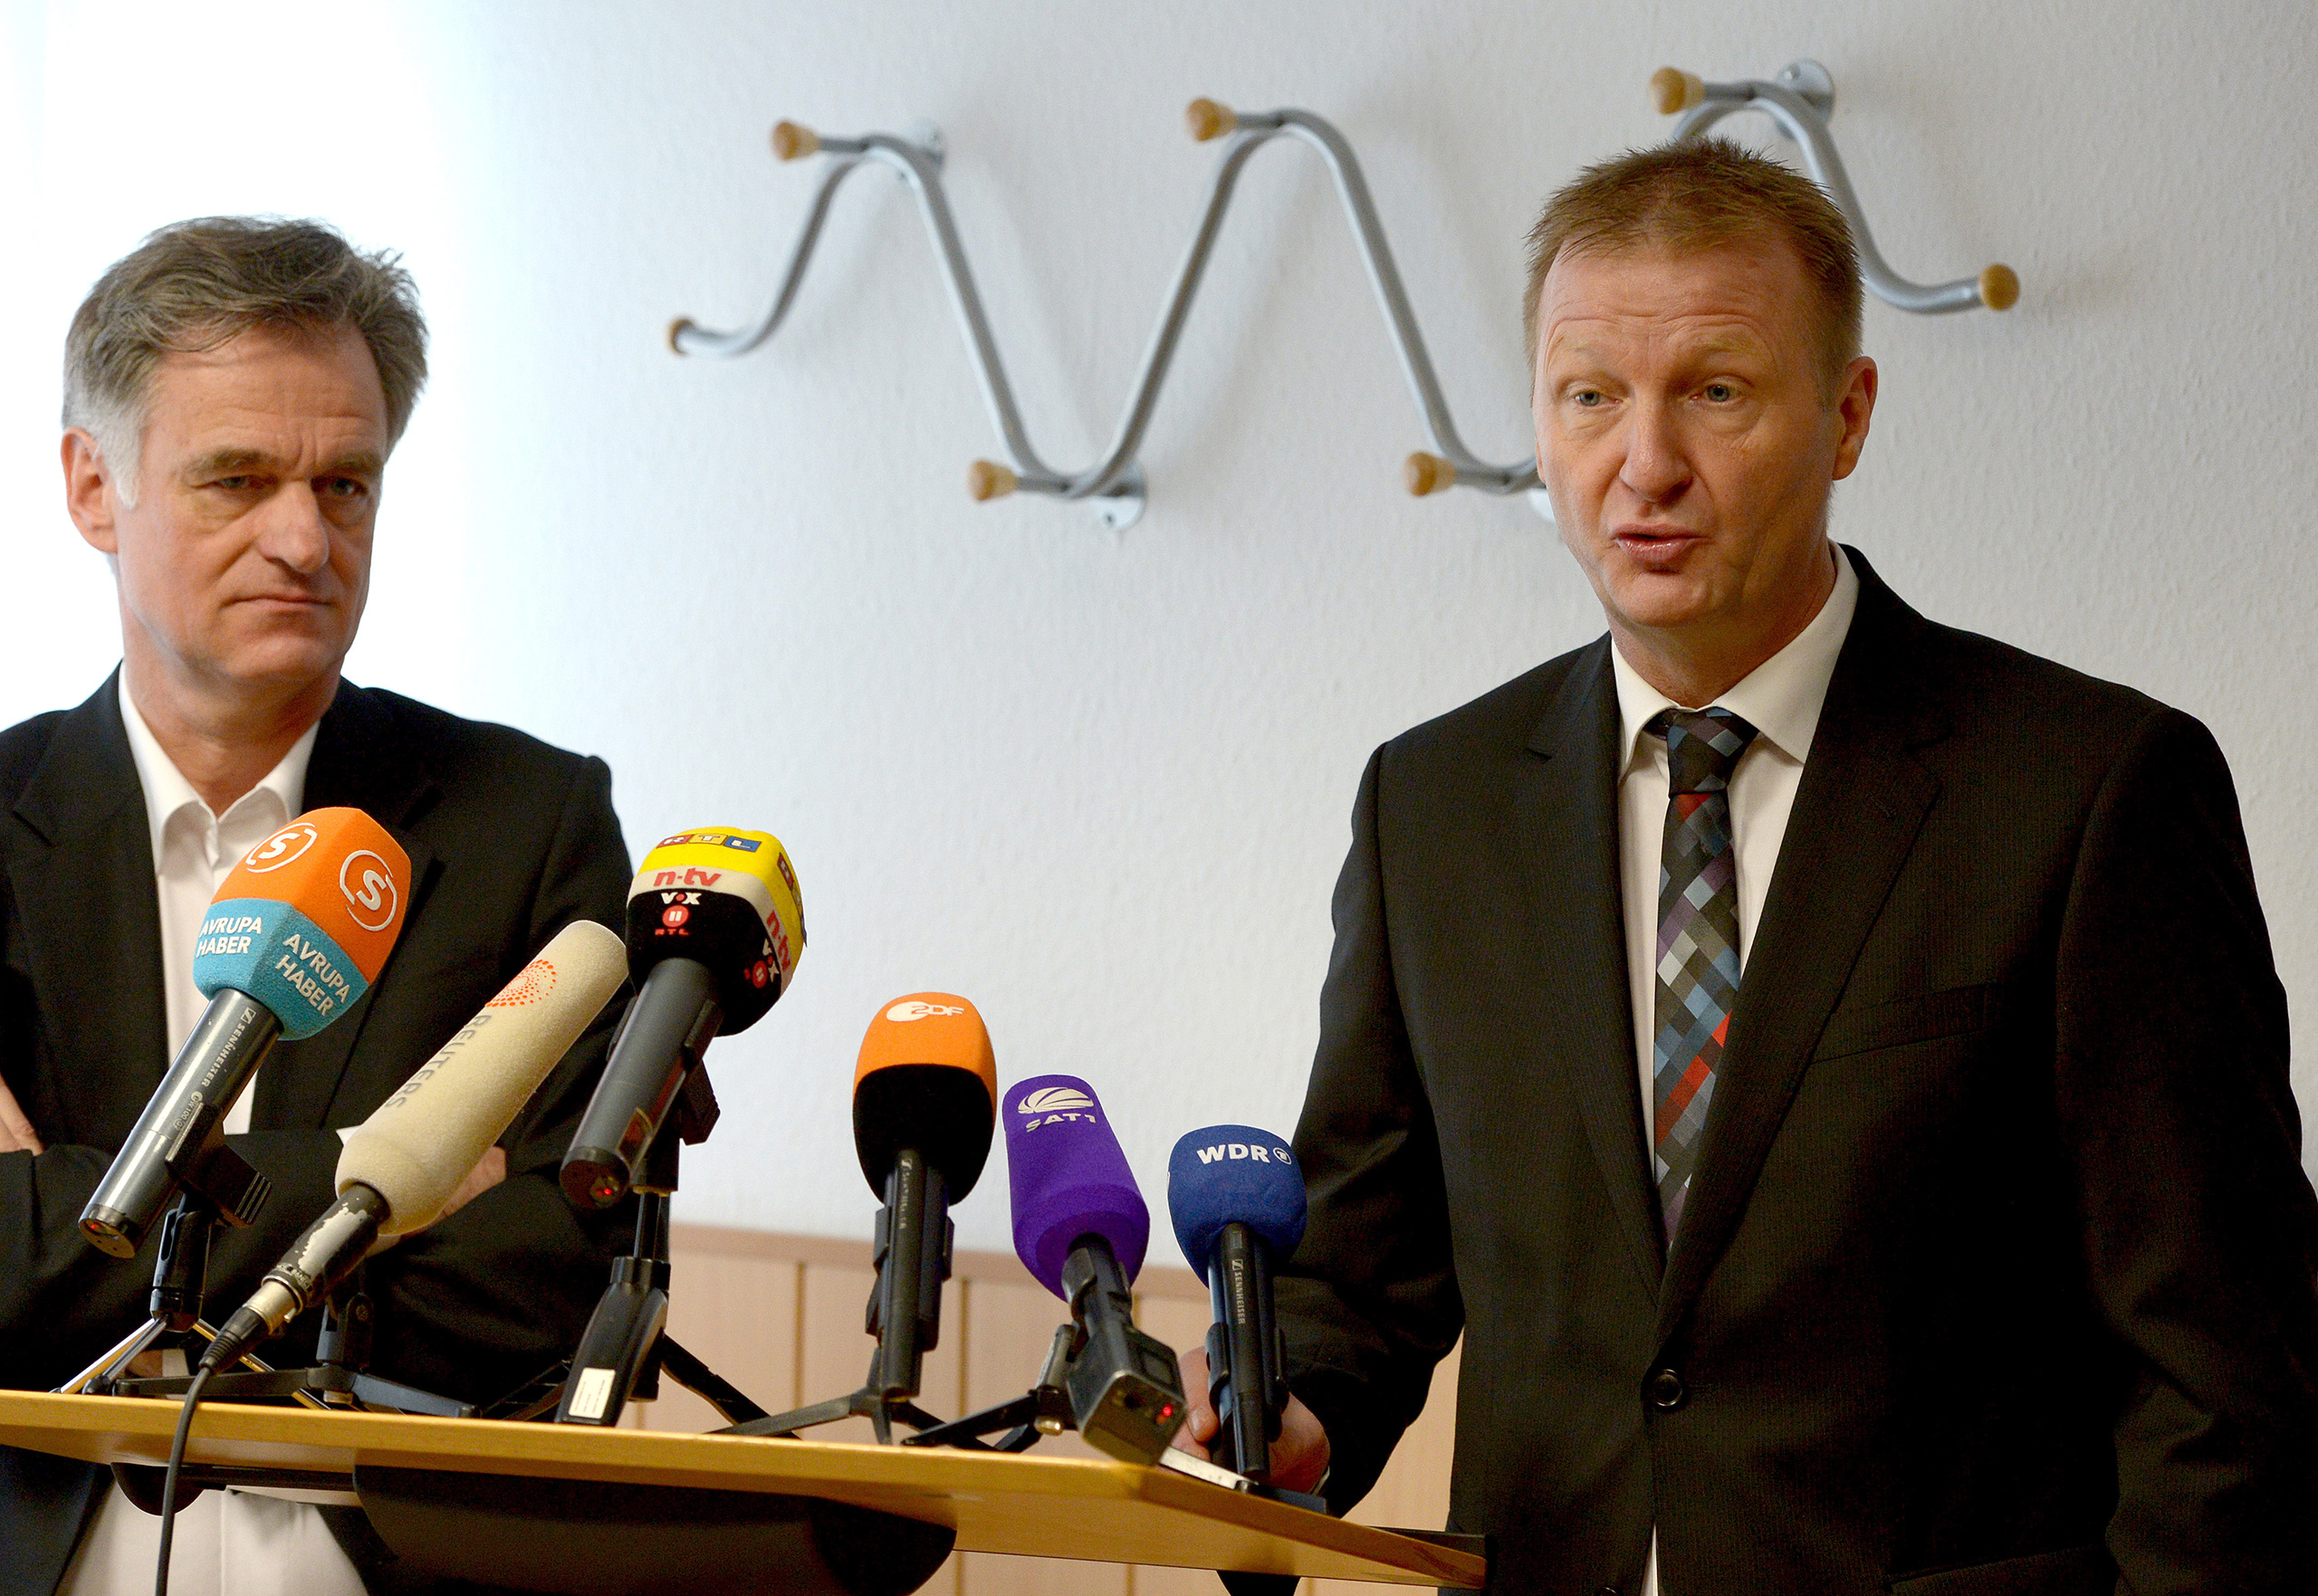 Dirk Sauerborn, left, stands next to North Rhine-Westphalia Interior Minister Ralf Jäger during a news conference on the intervention project Wegweiser, or Signpost, in Dusseldorf, Germany, March 24, 2014. (Federico Gambarini—picture-alliance/dpa/AP)